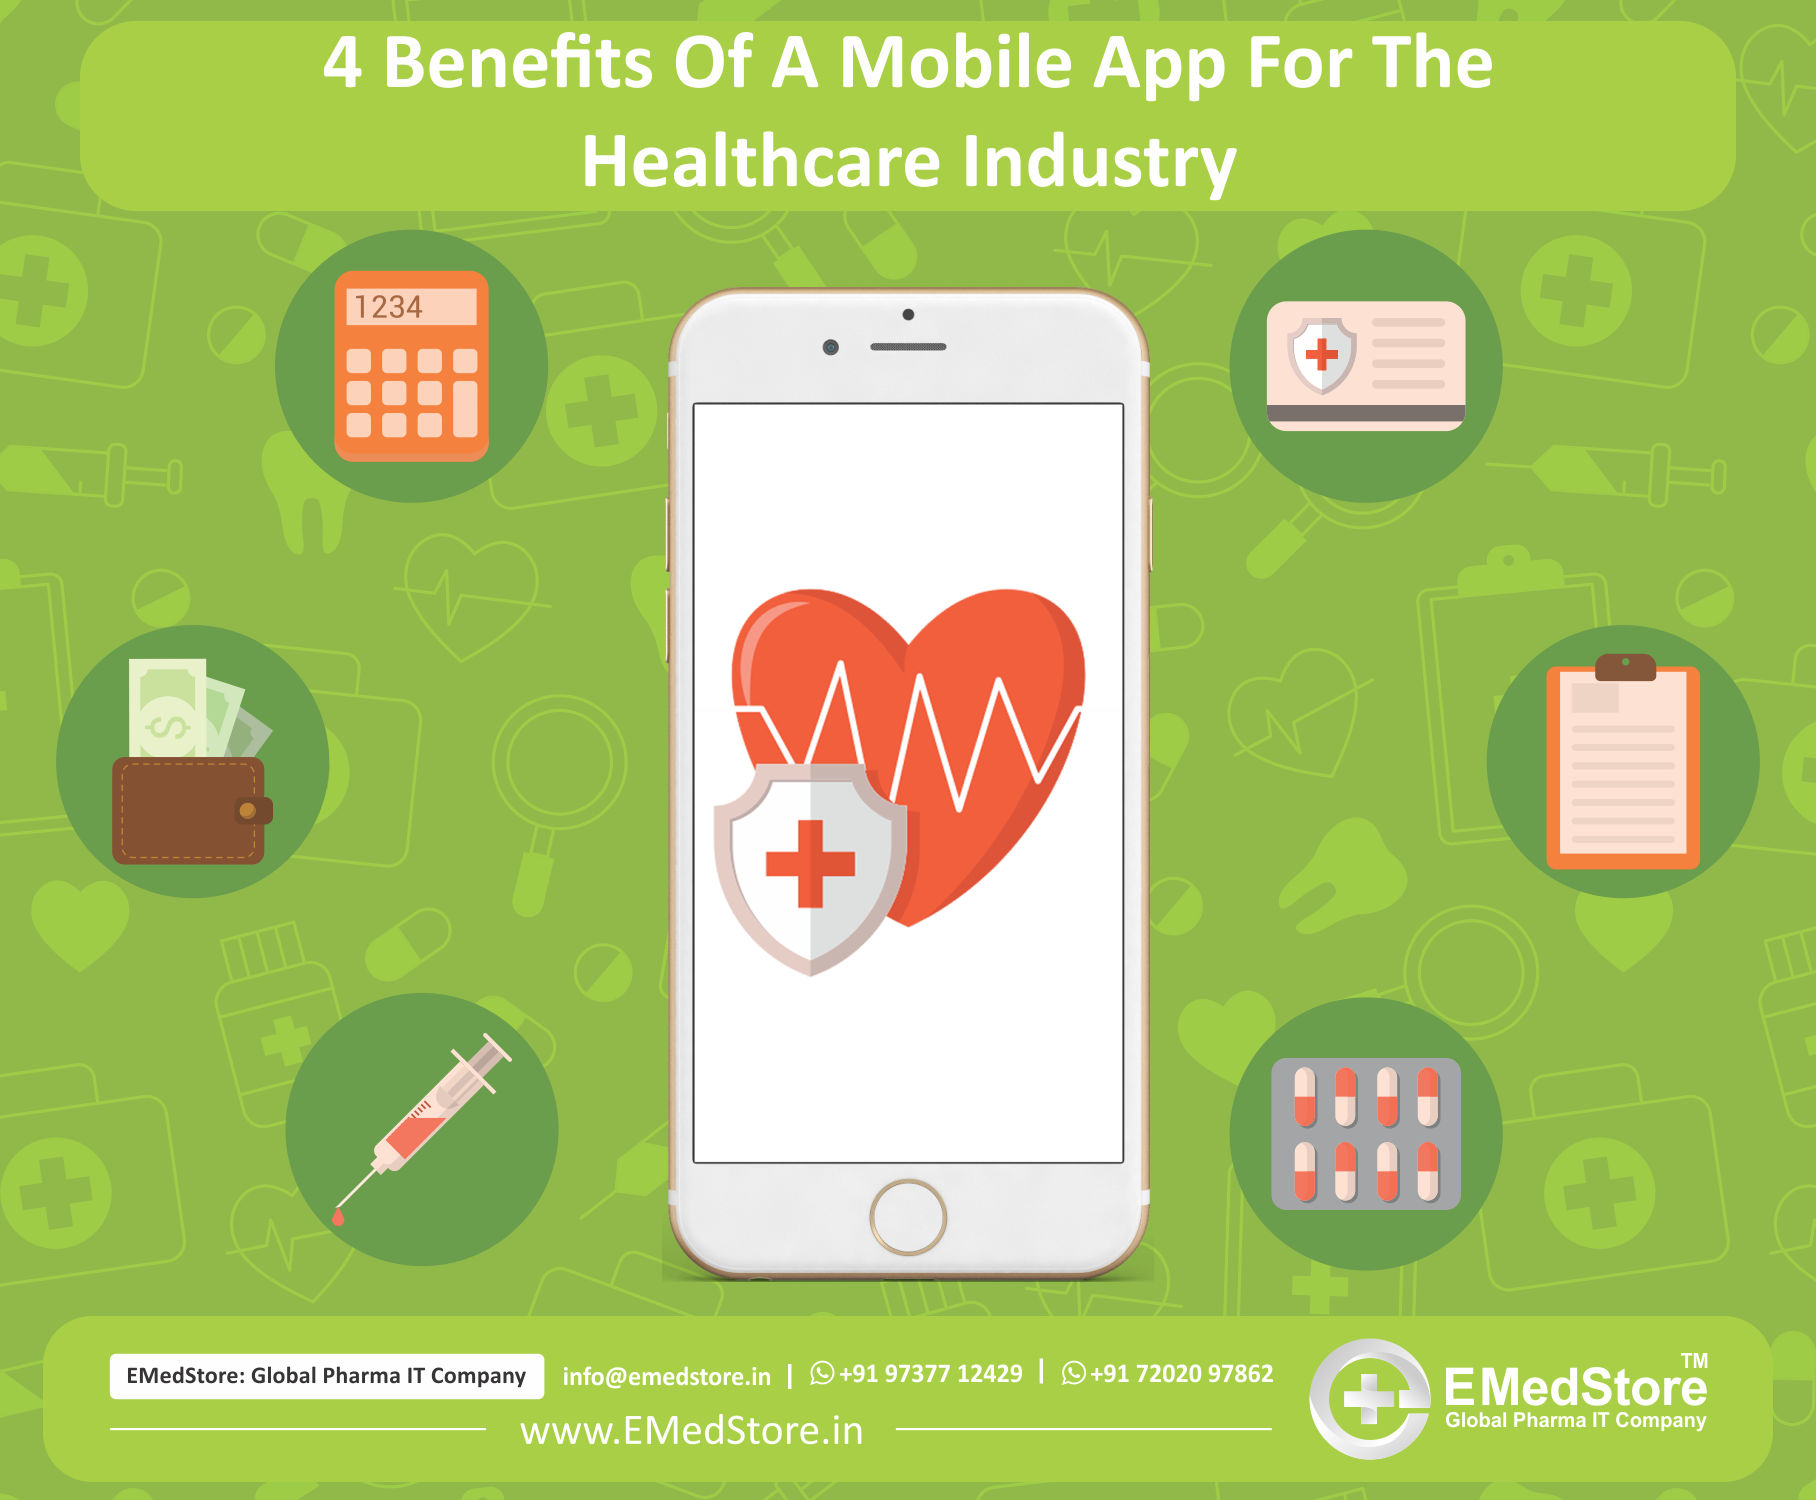 4 Benefits Of A Mobile App For The Healthcare Industry